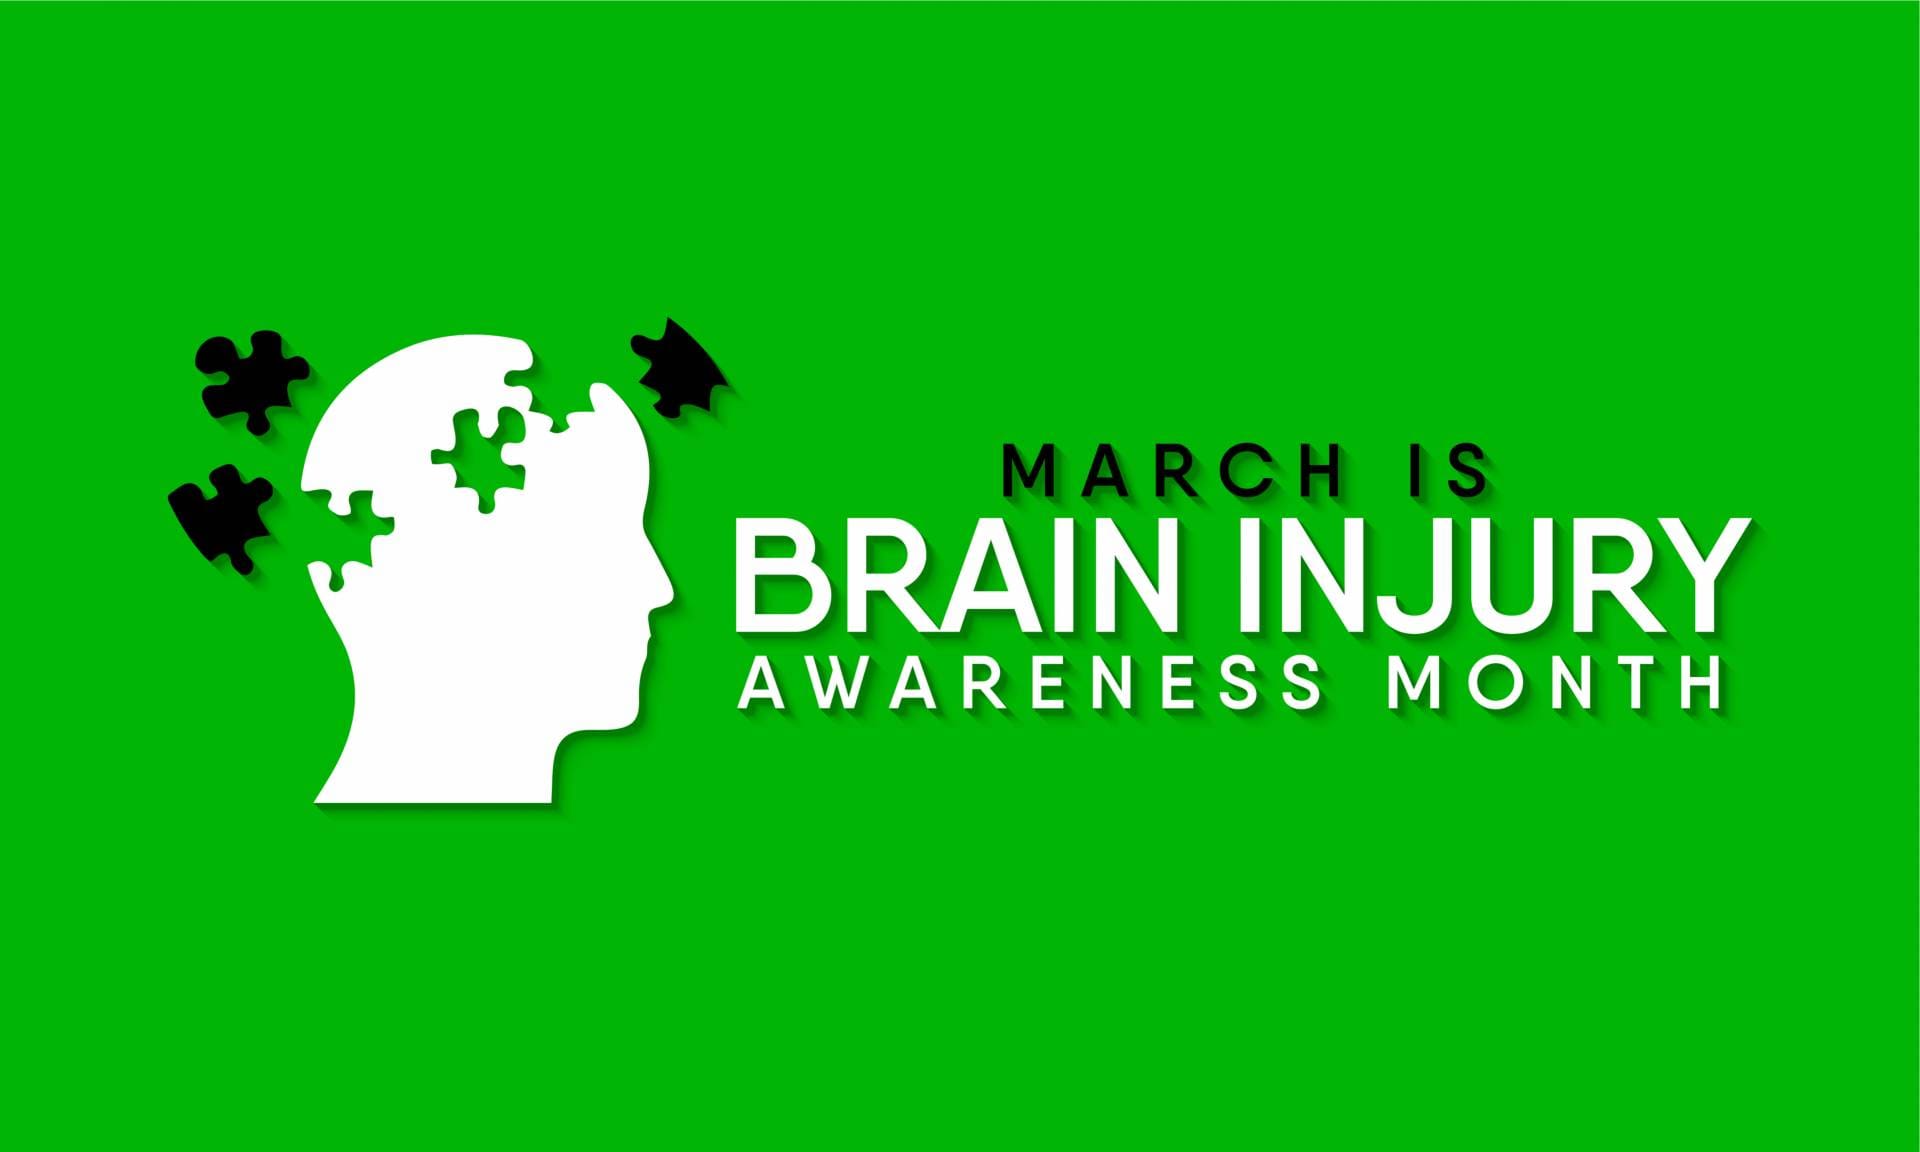 March is brain injury awareness month